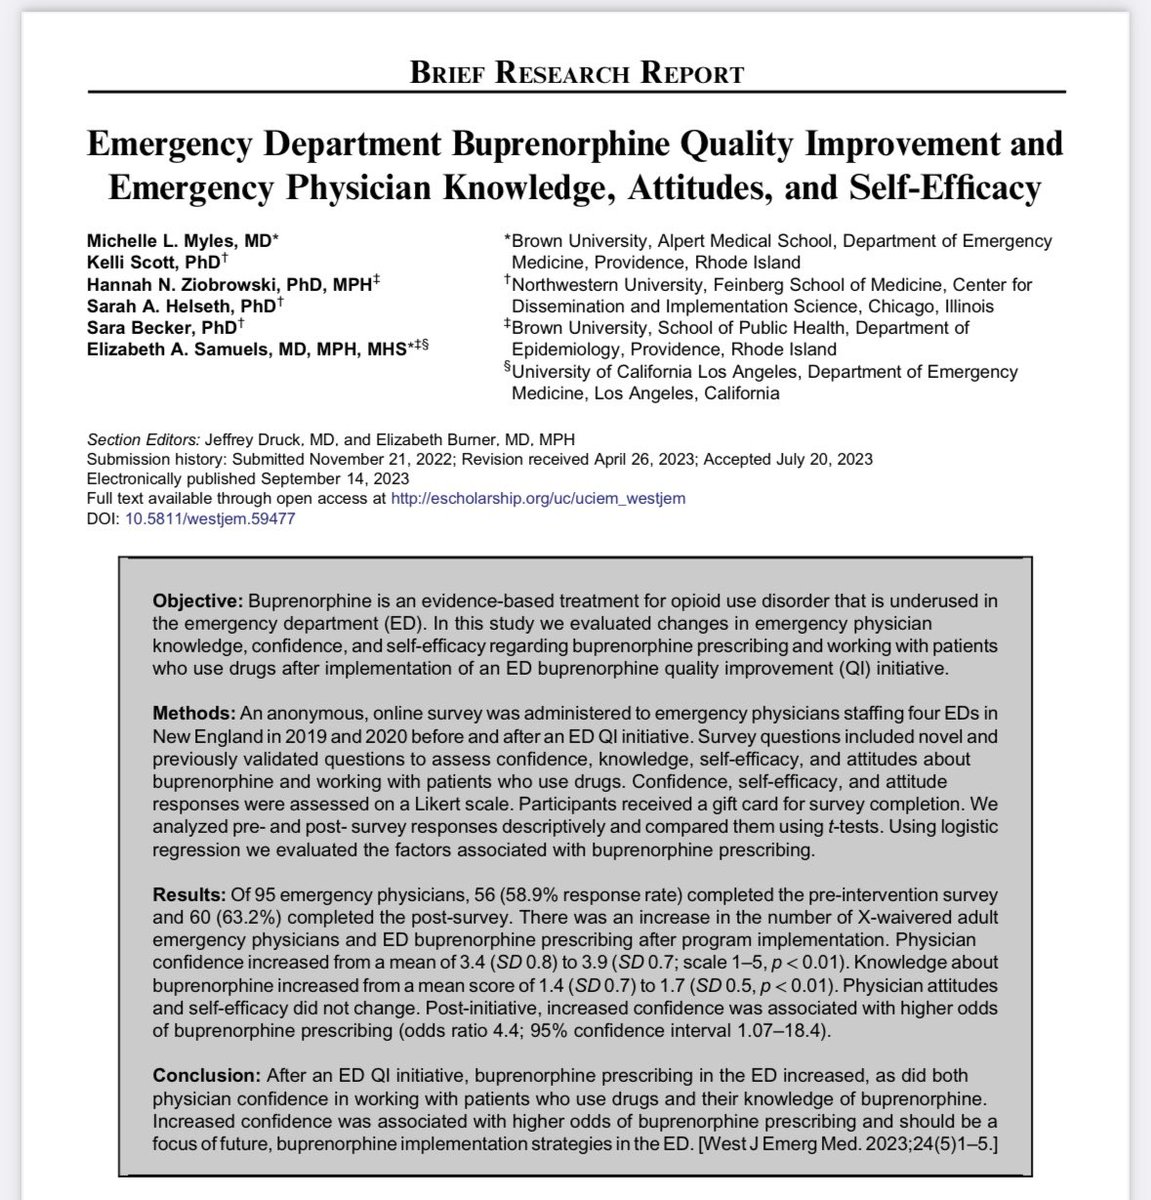 Thankful for my training @BrownEMRes and mentorship by @LizSamuels for allowing me to study and learn ways to improve our ED care for this vulnerable population. Link here: escholarship.org/uc/item/49g5k4…